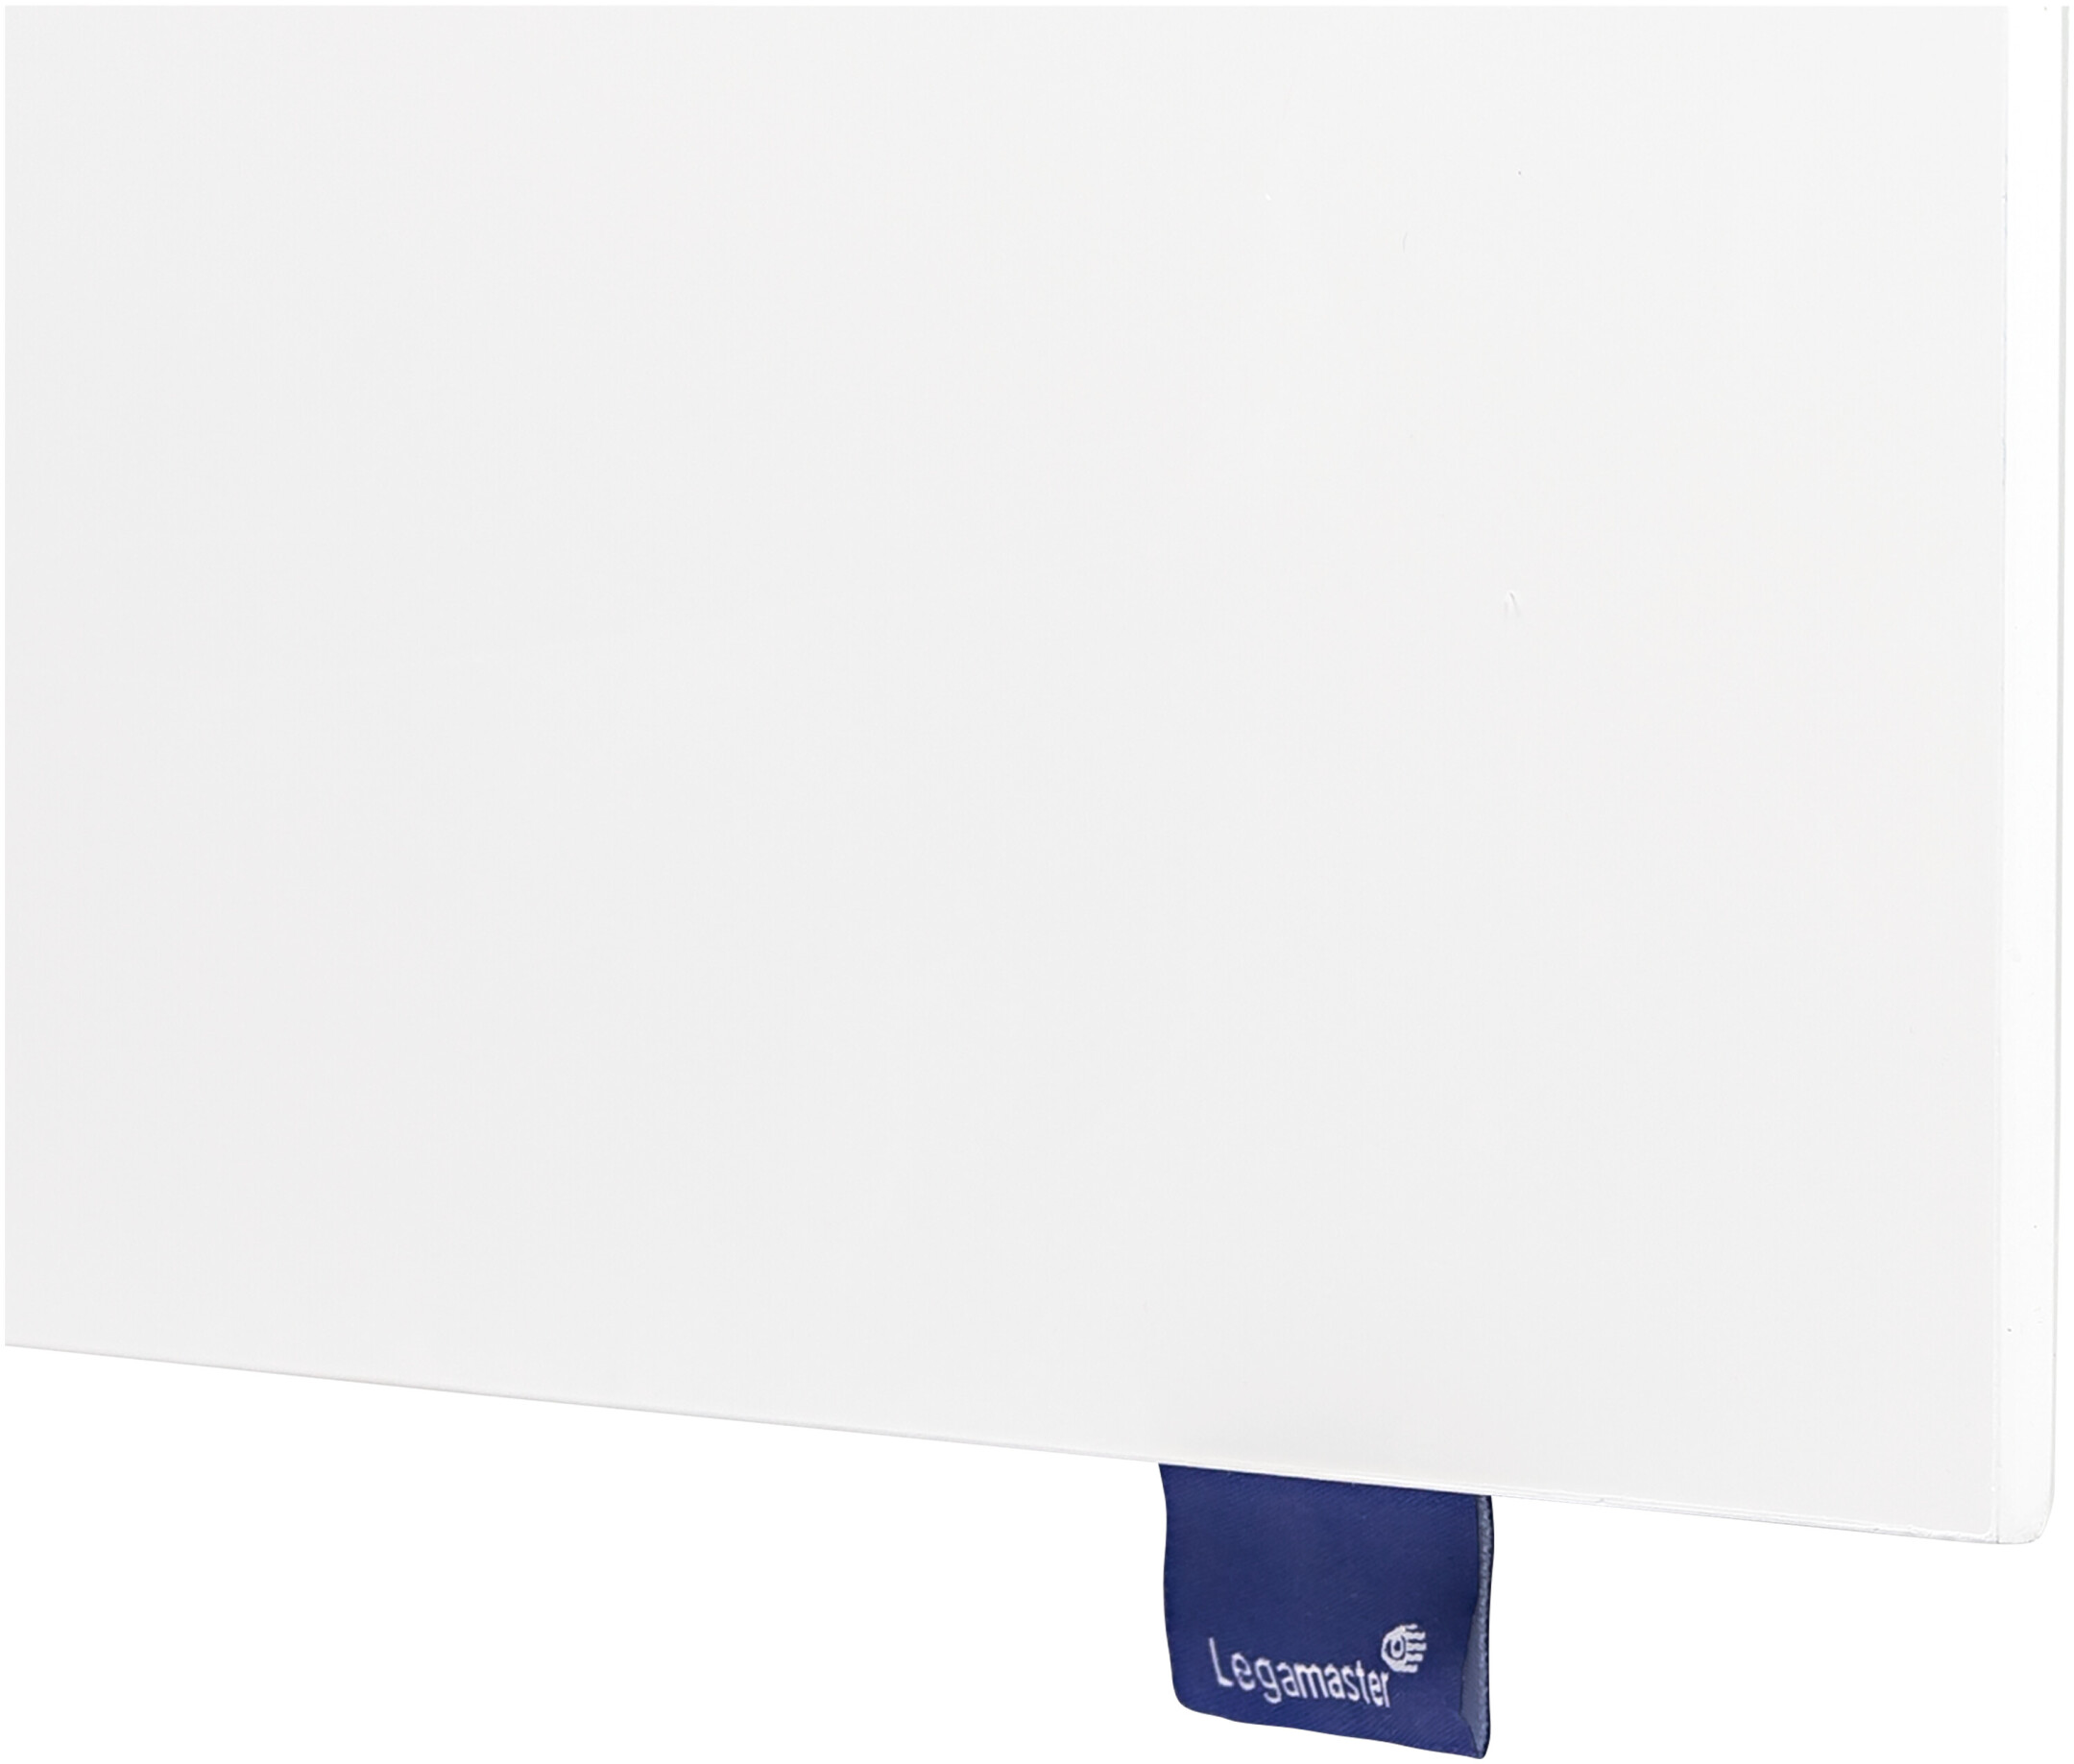 Legamaster-WALL-UP-Whiteboard-119-5-x-200-cm